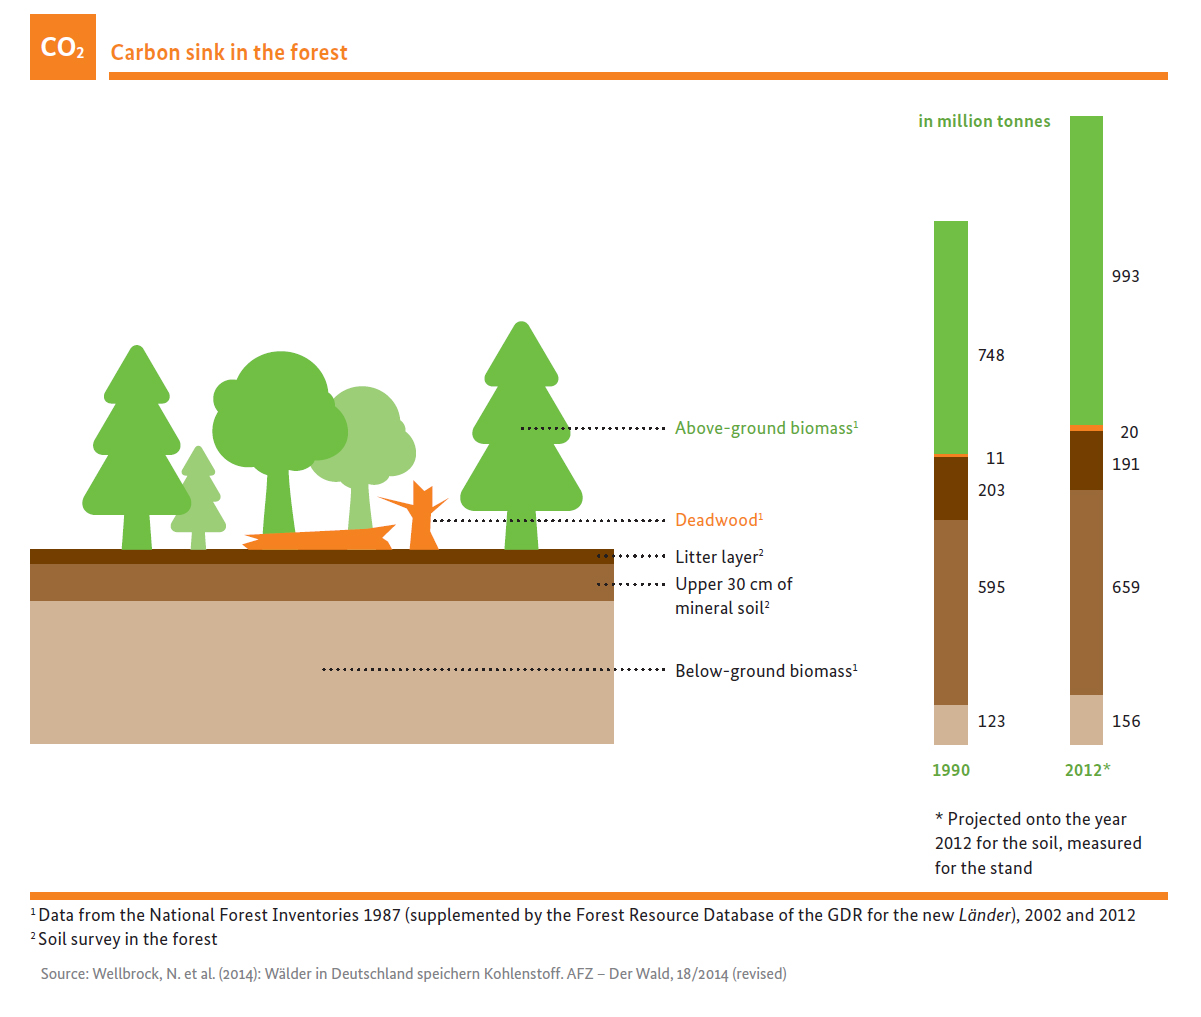 Carbon sink in the forest